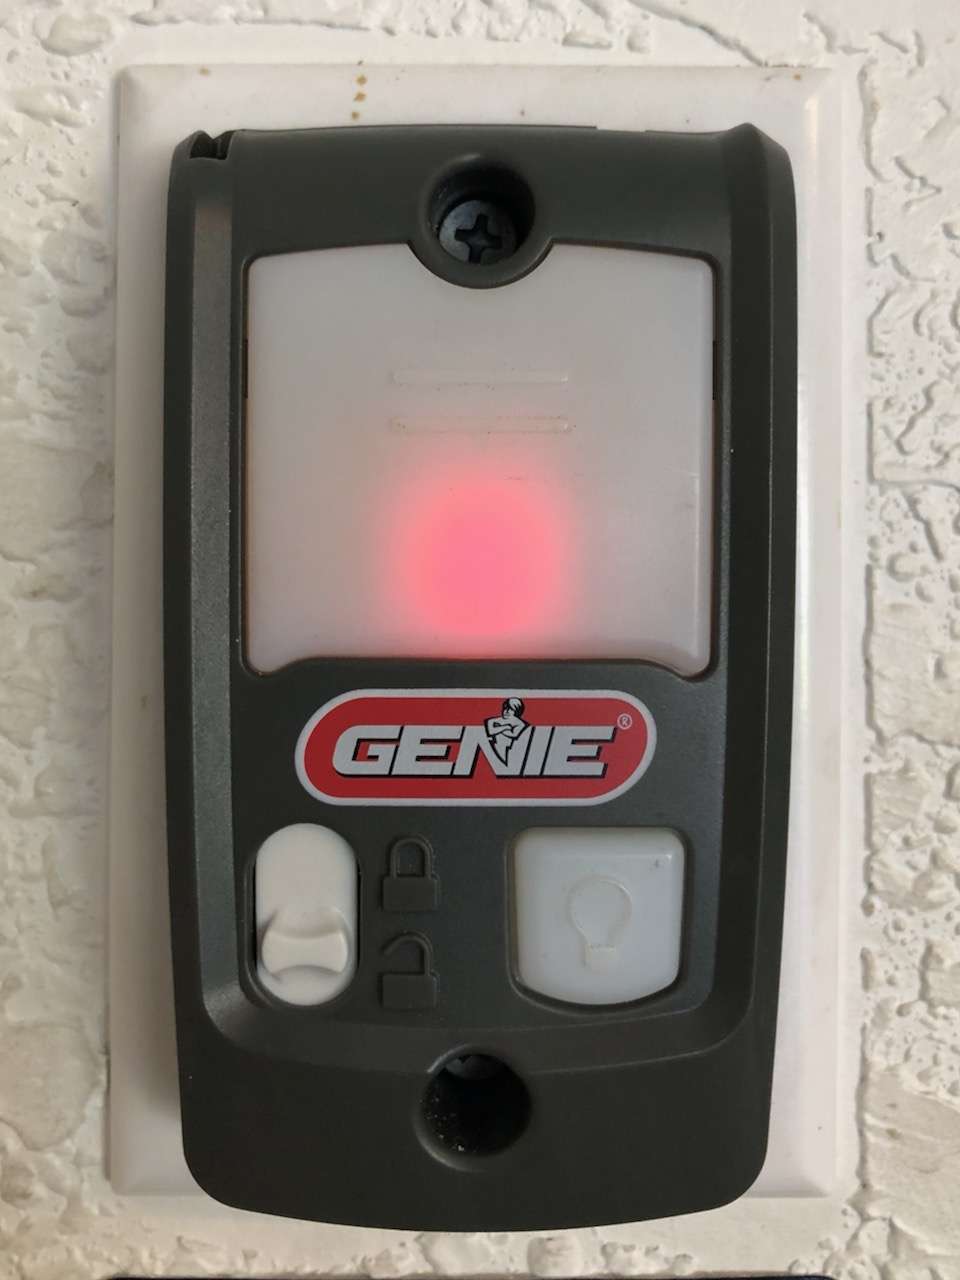 Newer style Series II Genie deluxe wall button SKU# 39165R with white buttons.